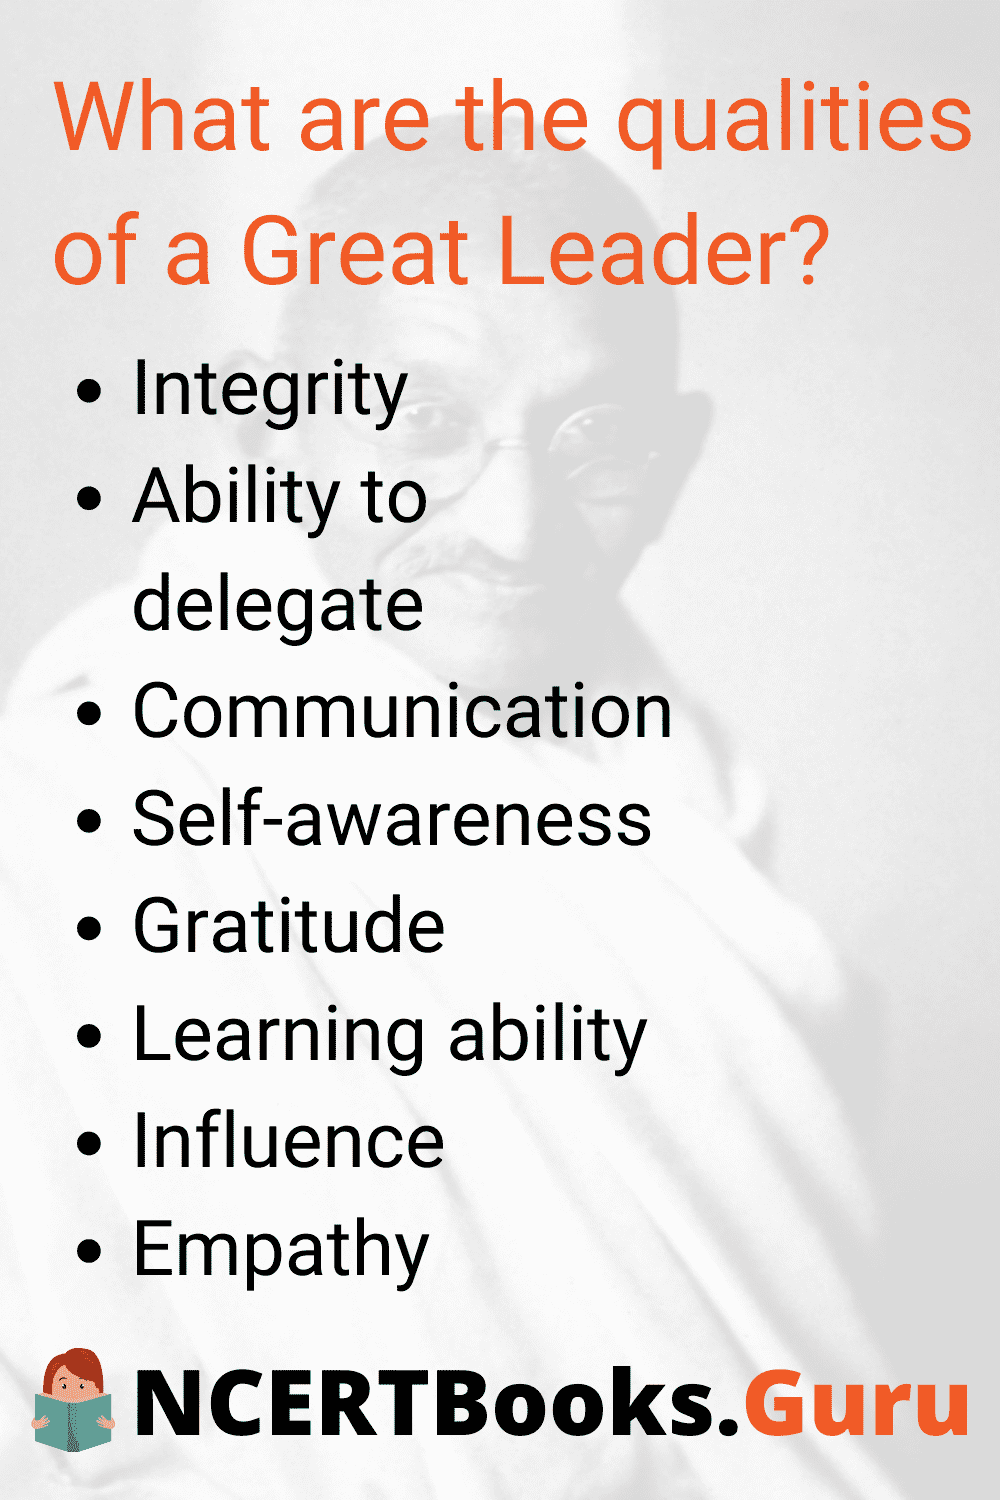 Qualities of Great Leader